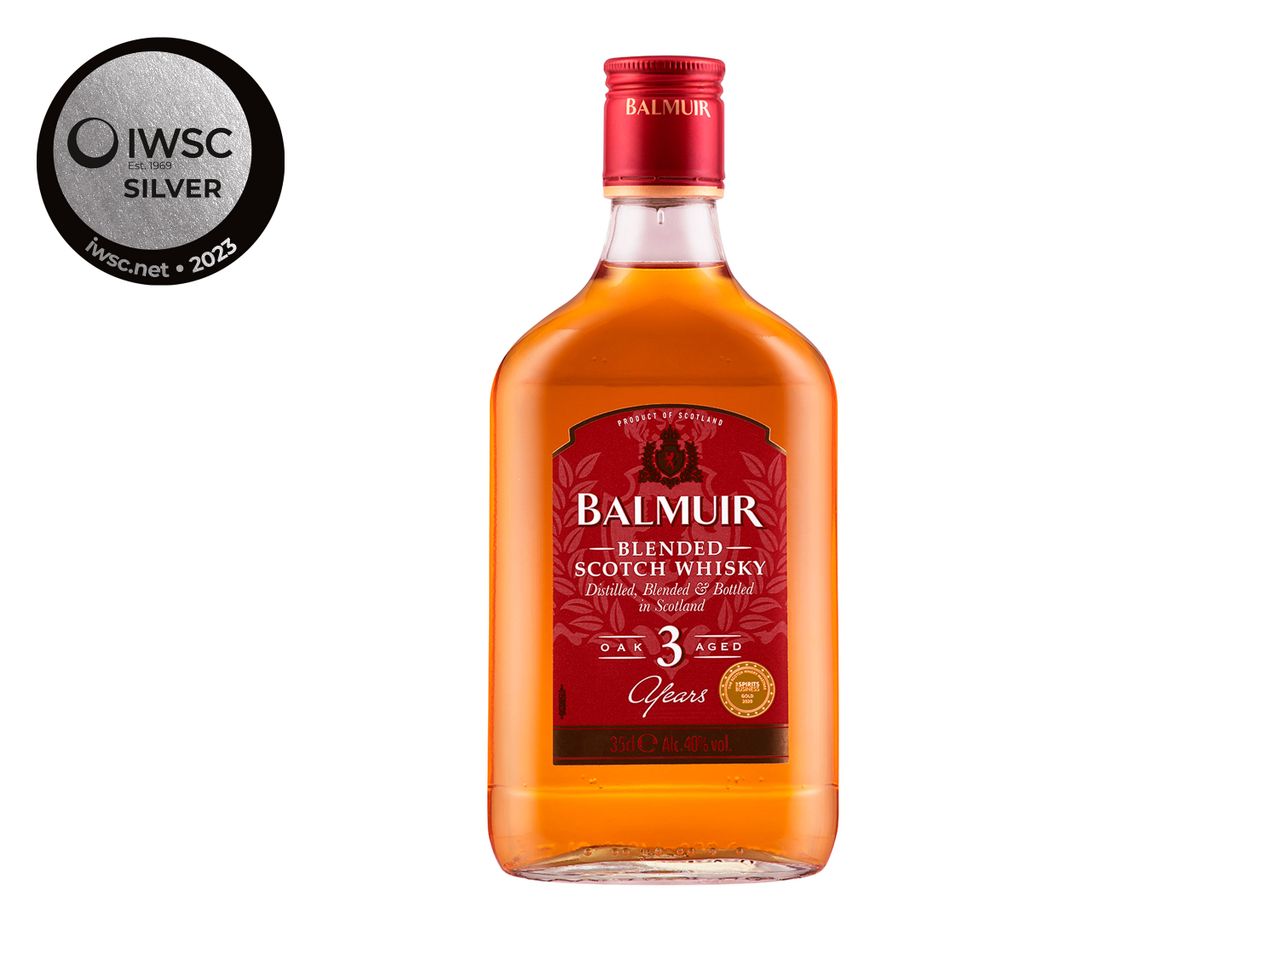 Go to full screen view: Balmuir Blended Scotch Whisky - Image 1